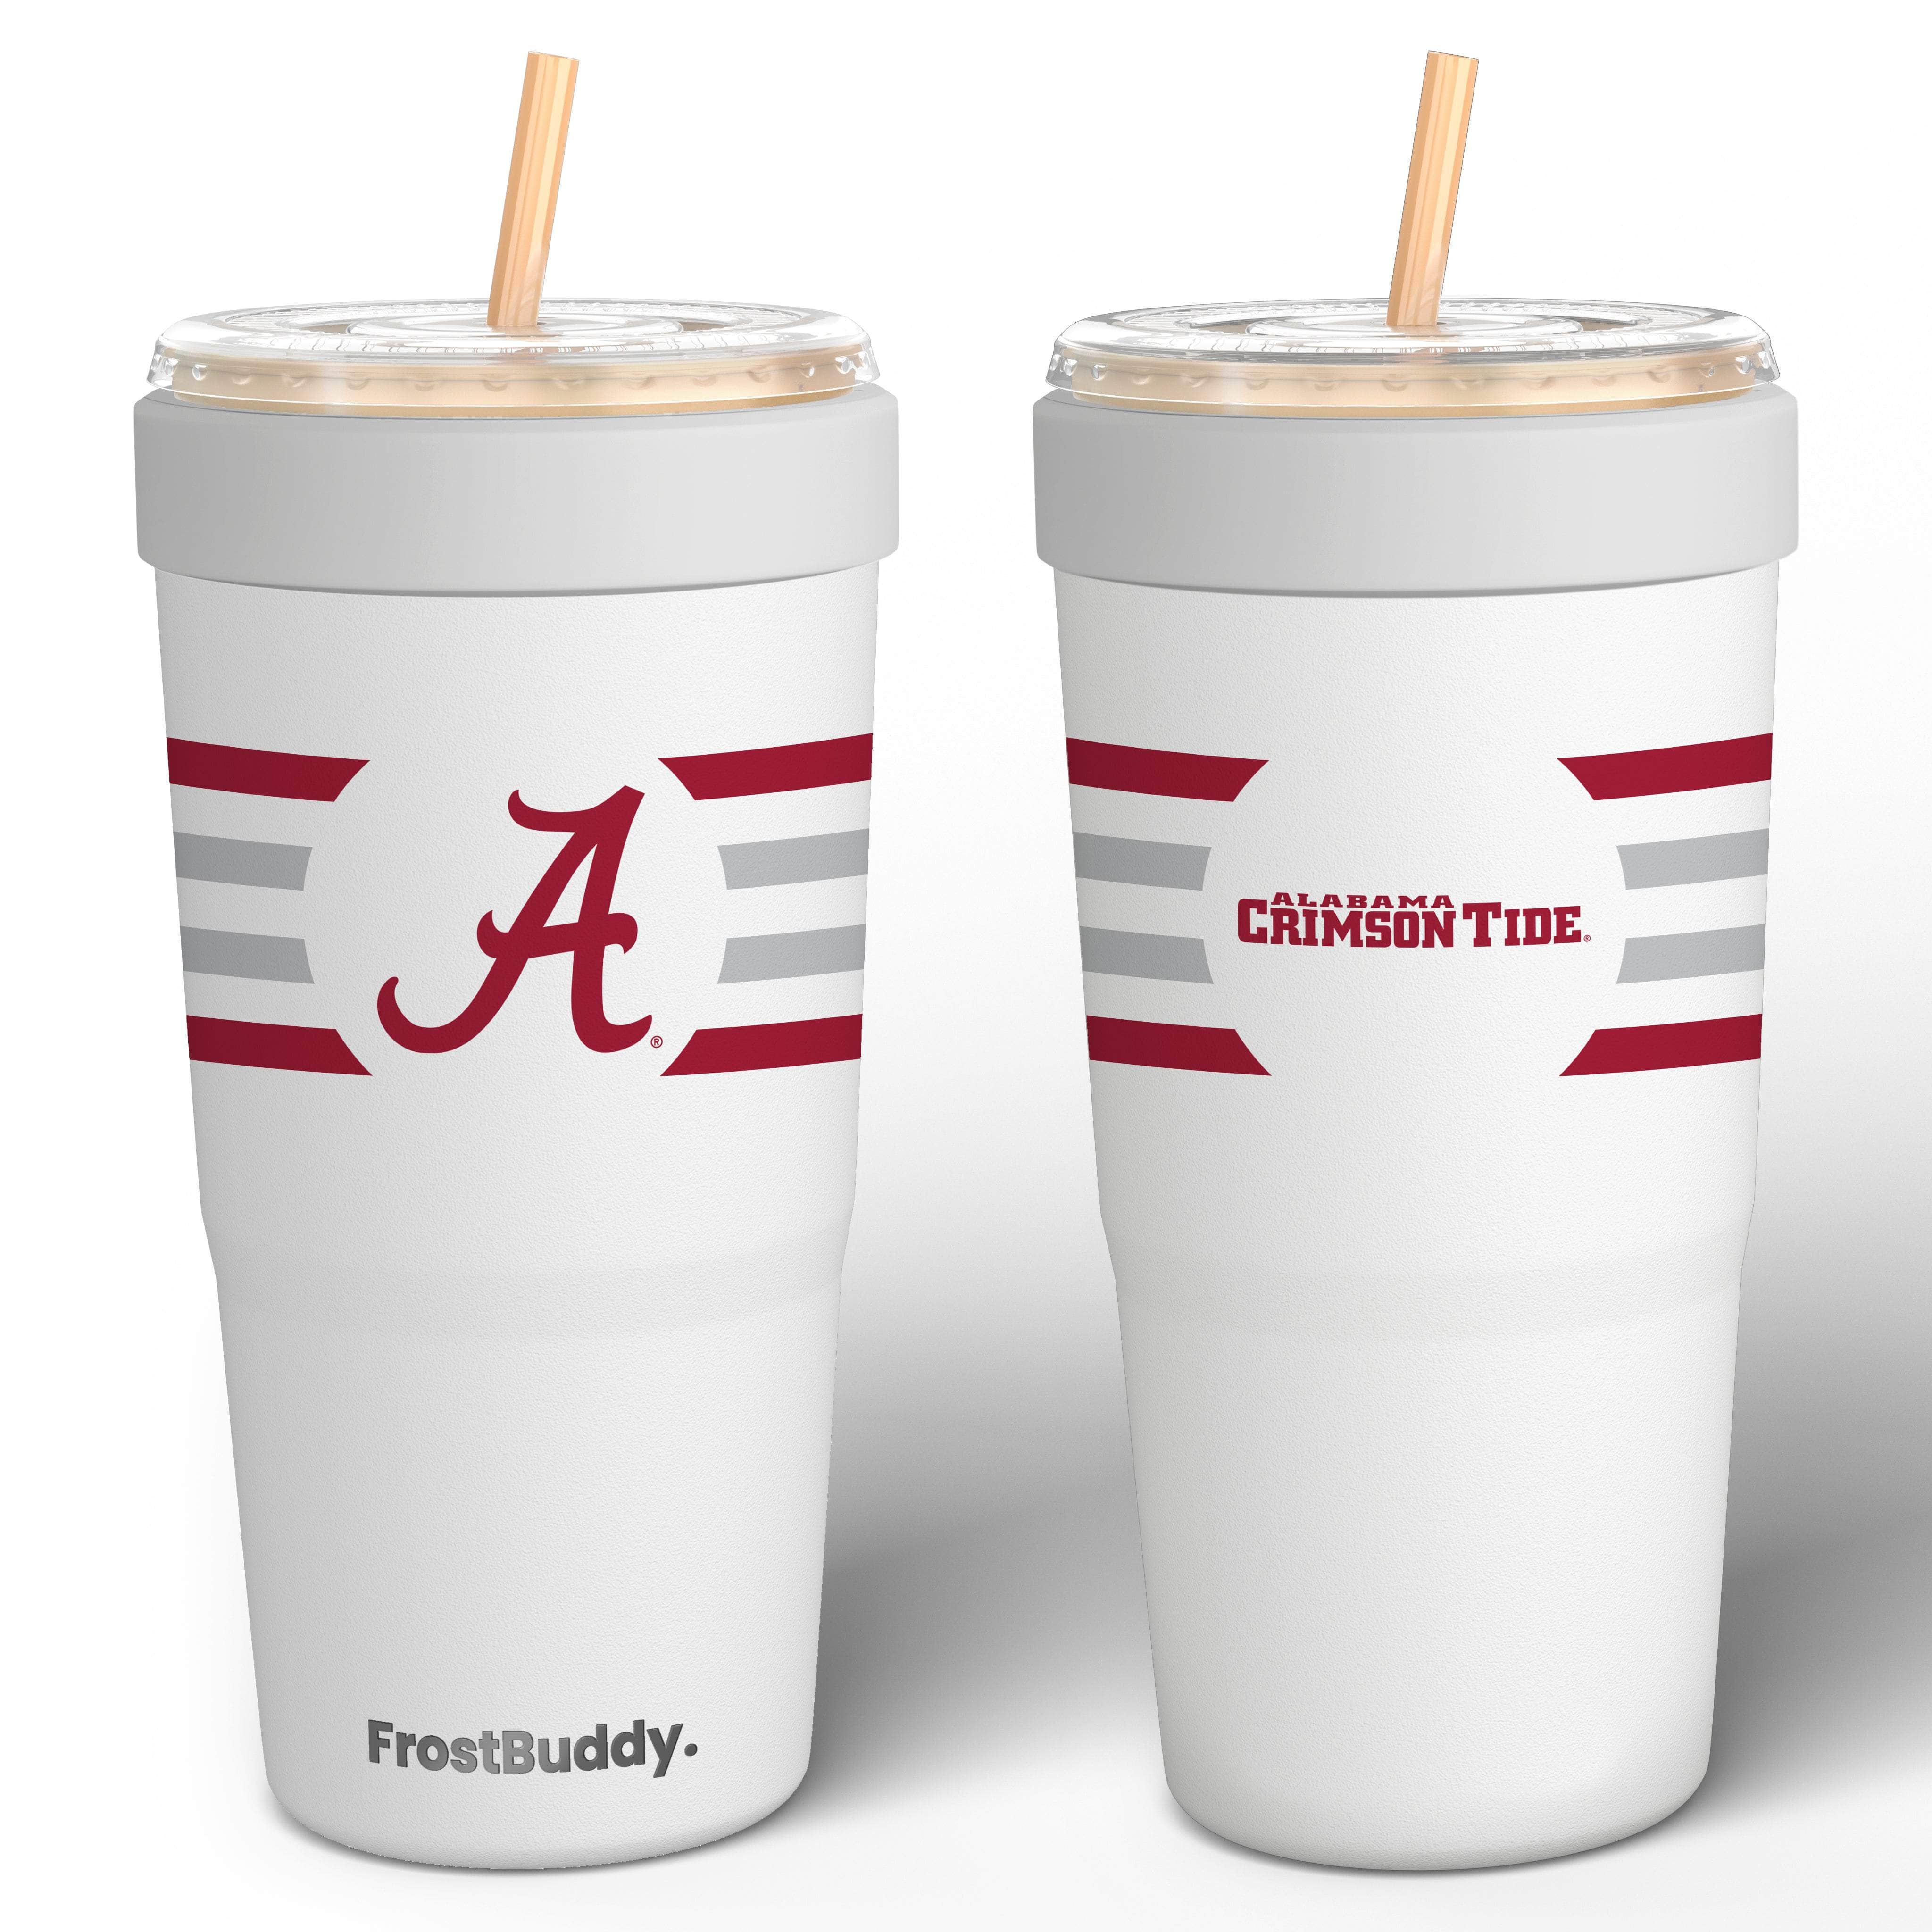 To-Go Buddy | University of Alabama Fits Small, Medium, Large Iced / Hot Coffee Cups from Major Coffee Chains - Keep Drinks Hot/Cold 12+ Hours | Frost